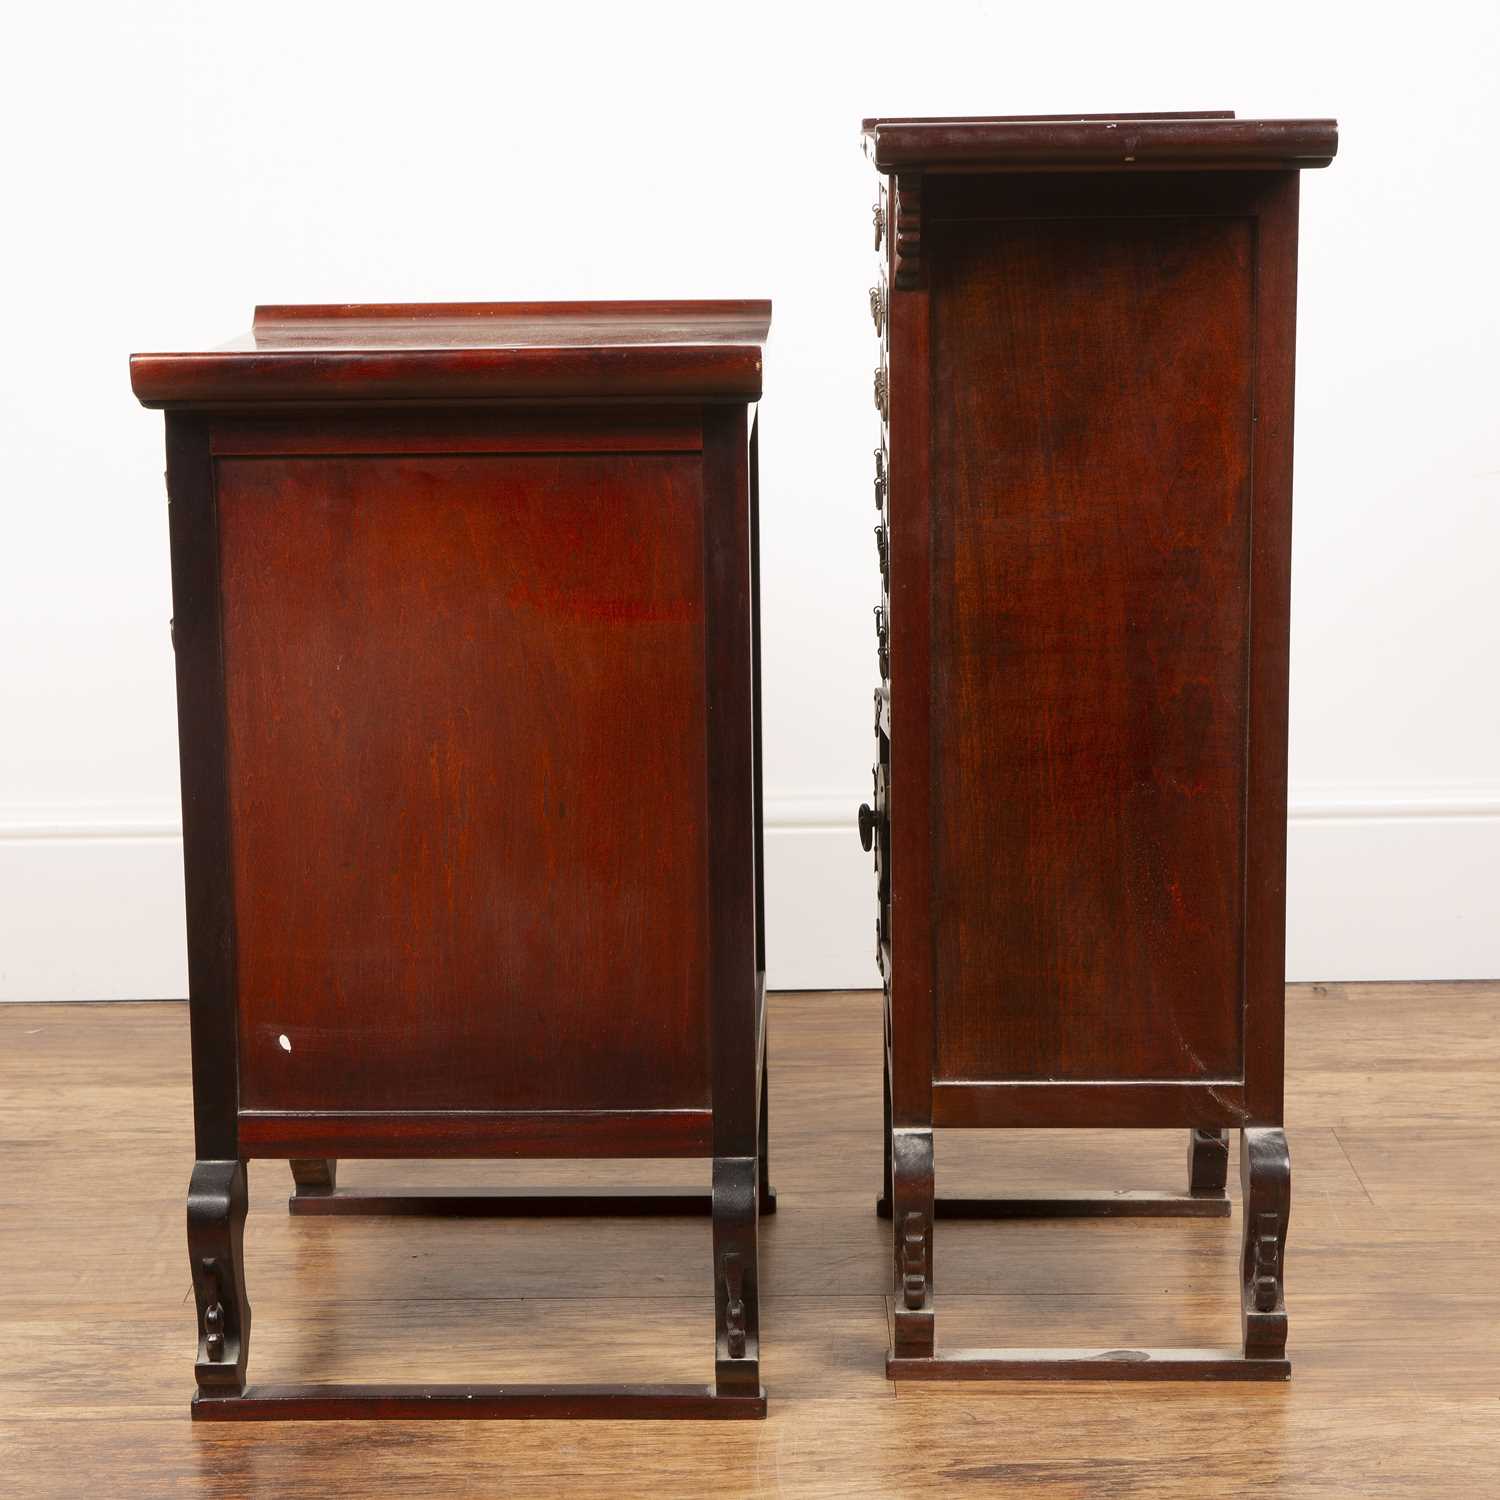 Two small sets of drawers Chinese, one 47cm wide x 75cm high x 25cm deep and the other 44.5cm wide x - Image 5 of 6